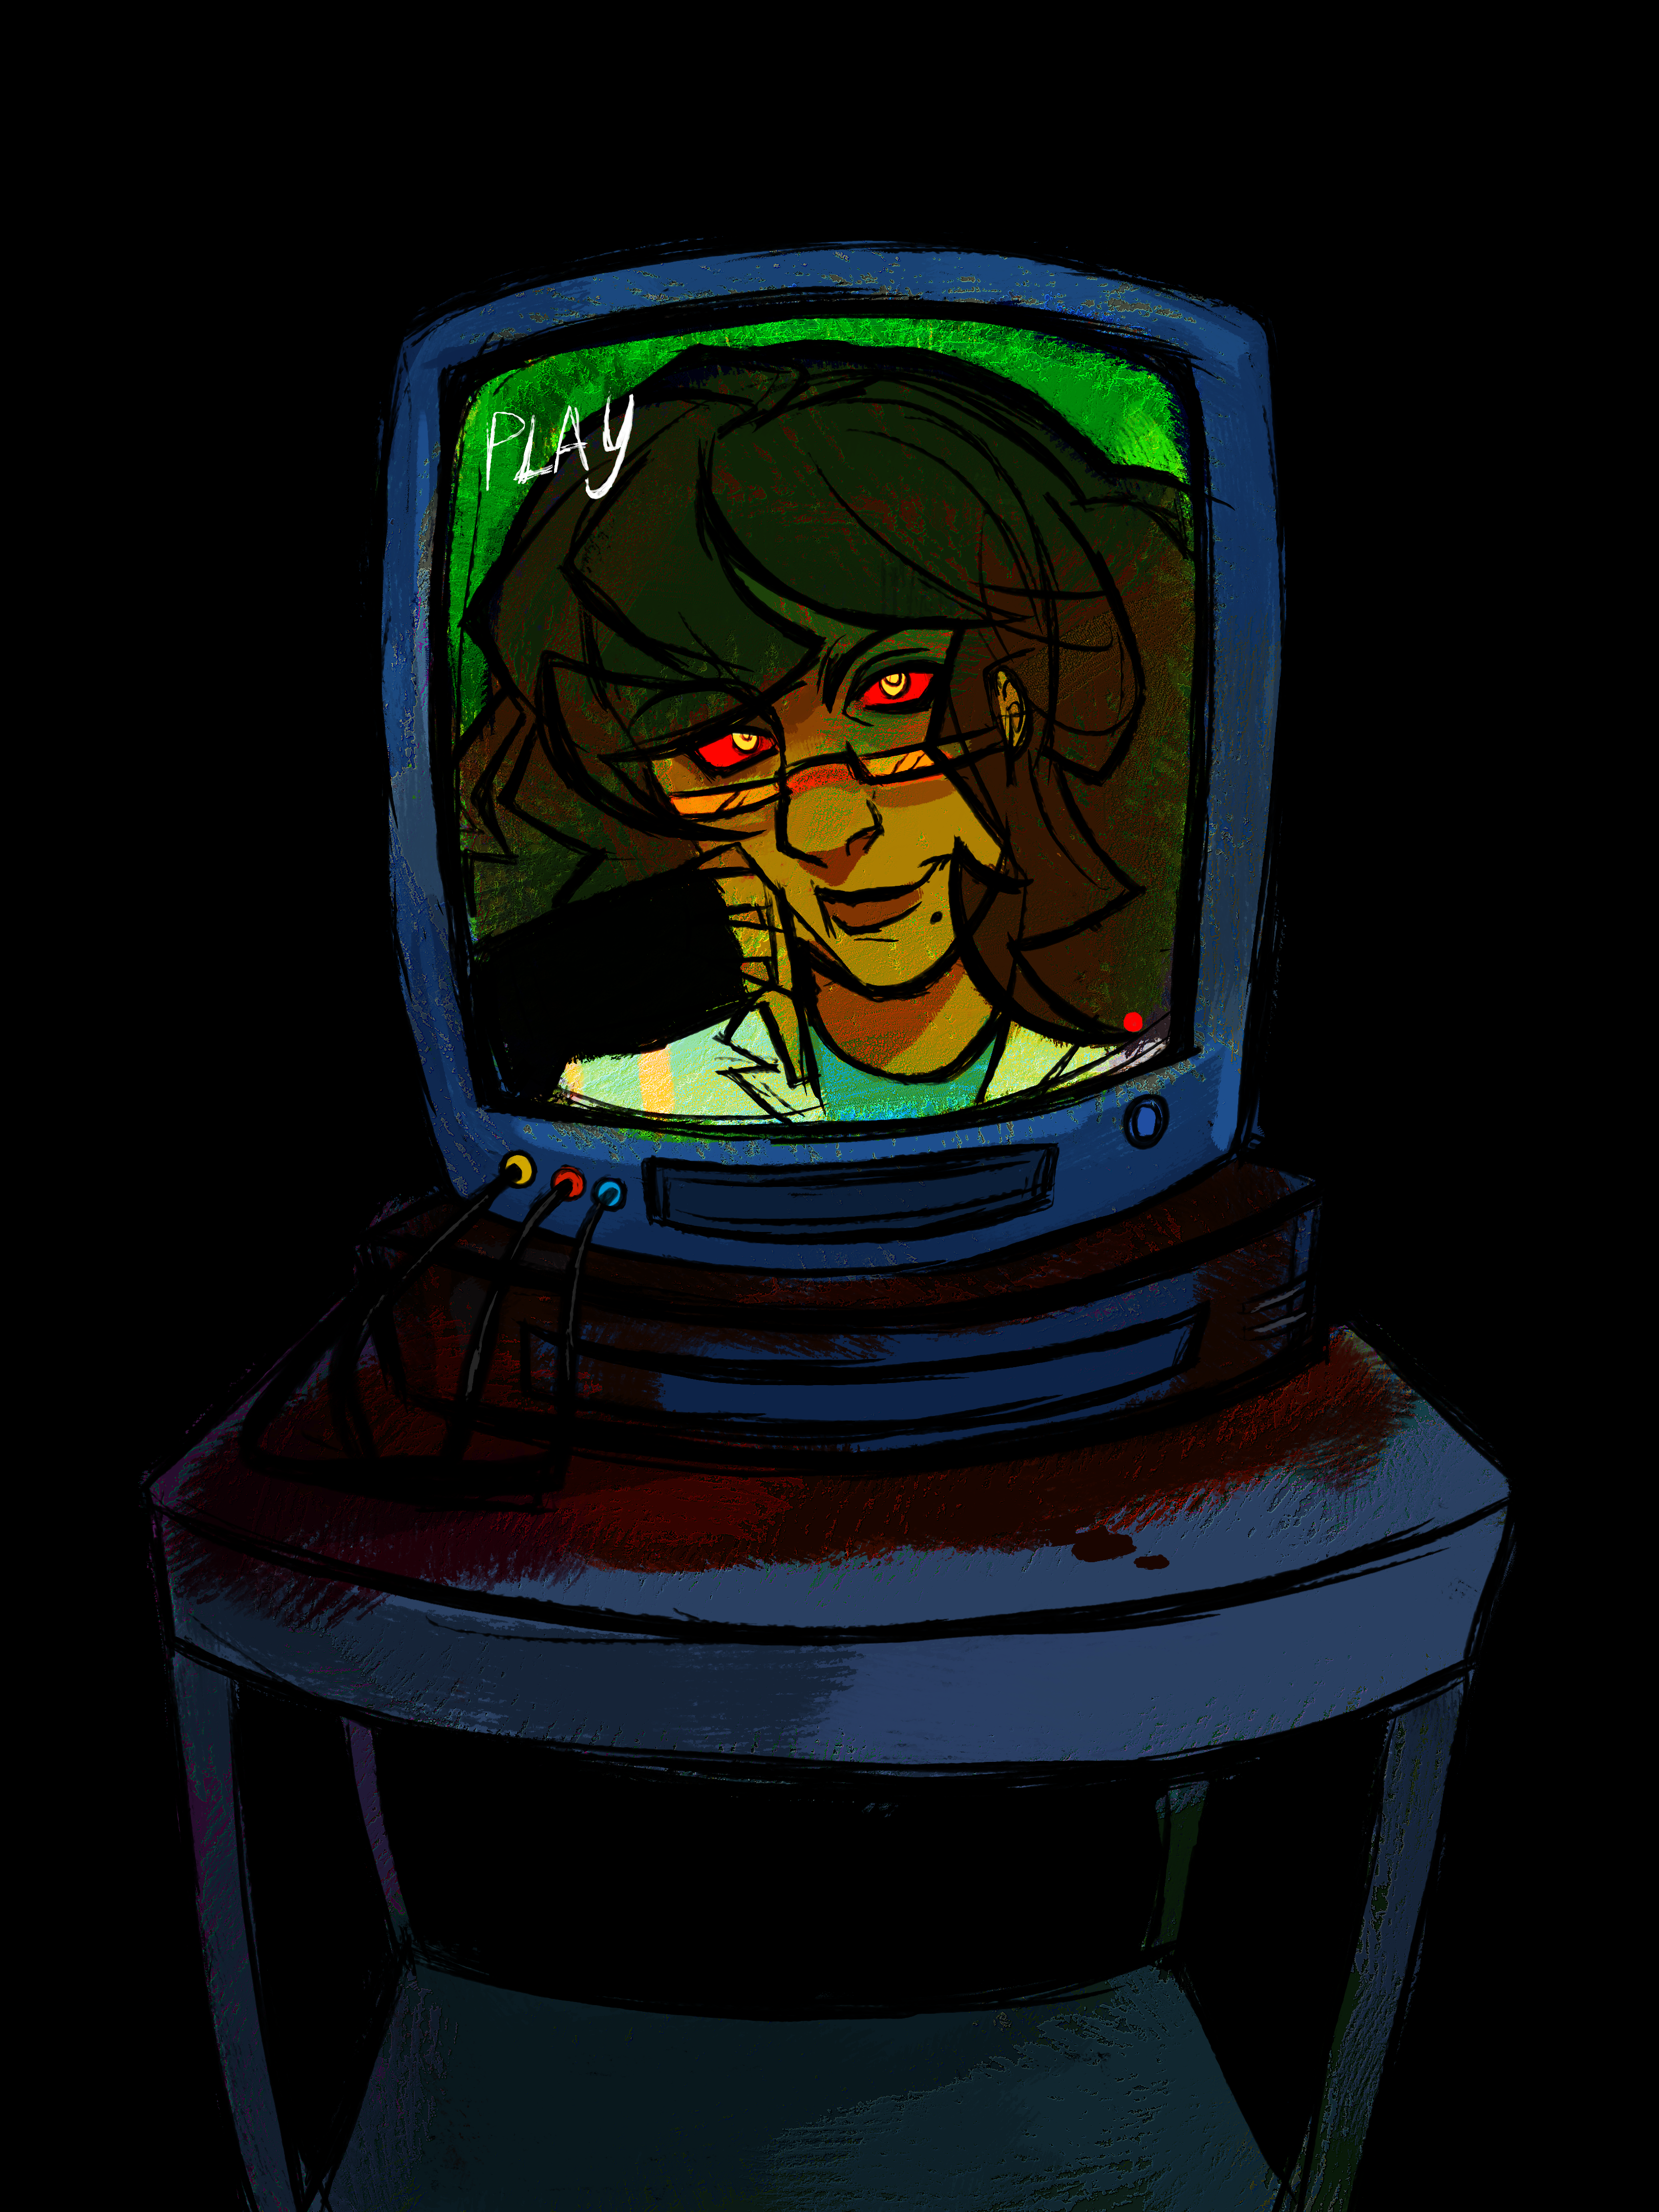 A person smiling from the inside of a television screen with blood